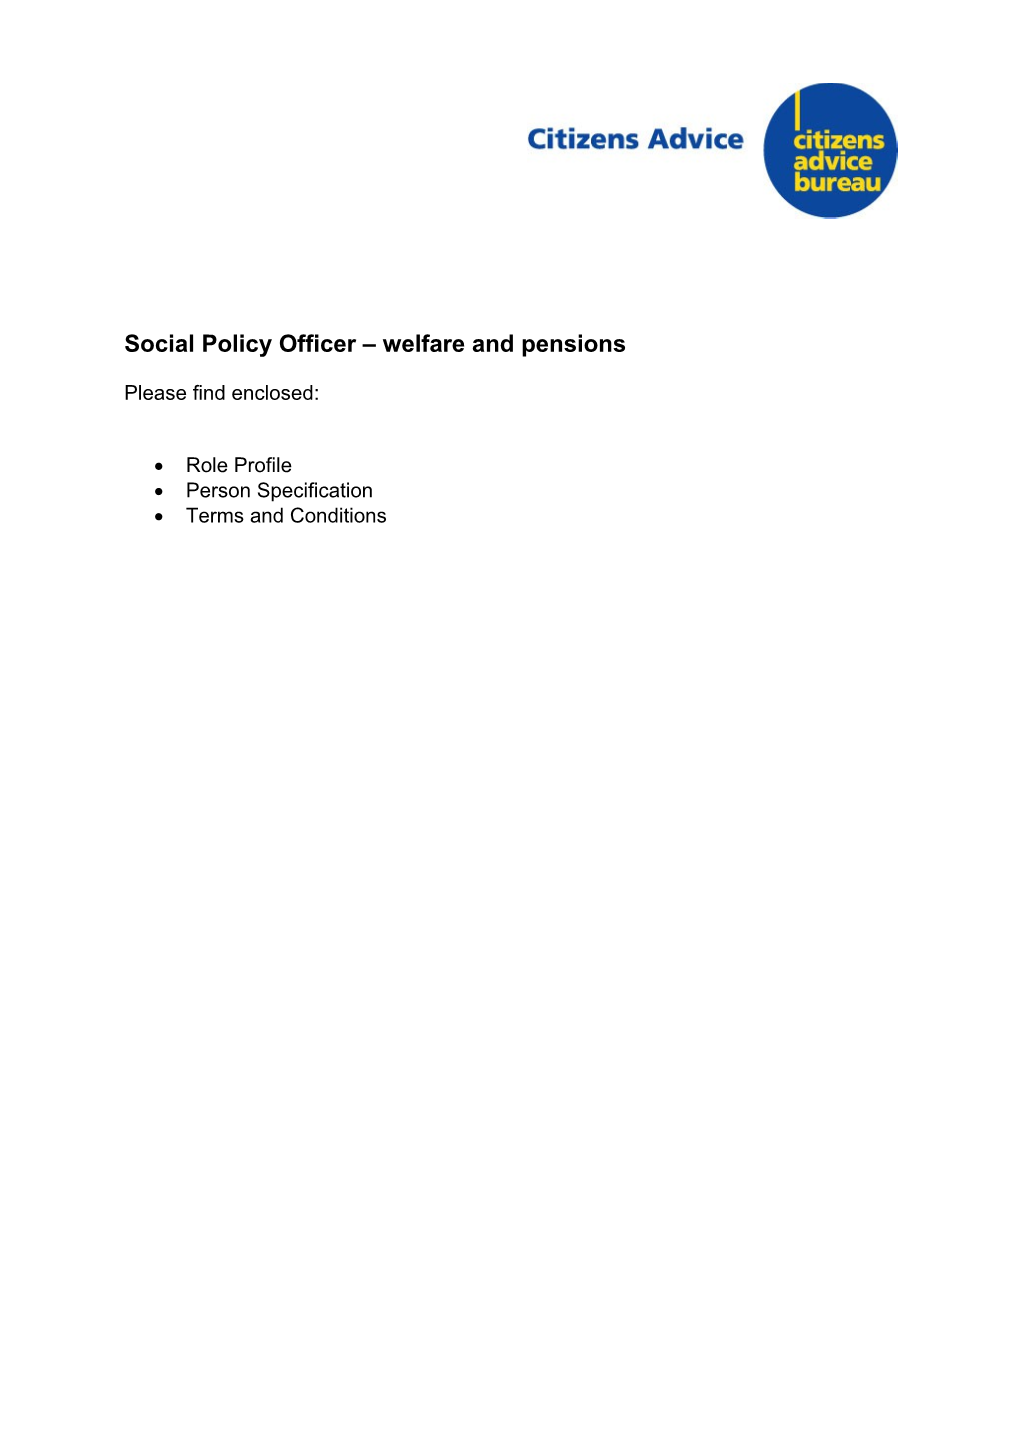 Social Policy Officer Welfare and Pensions